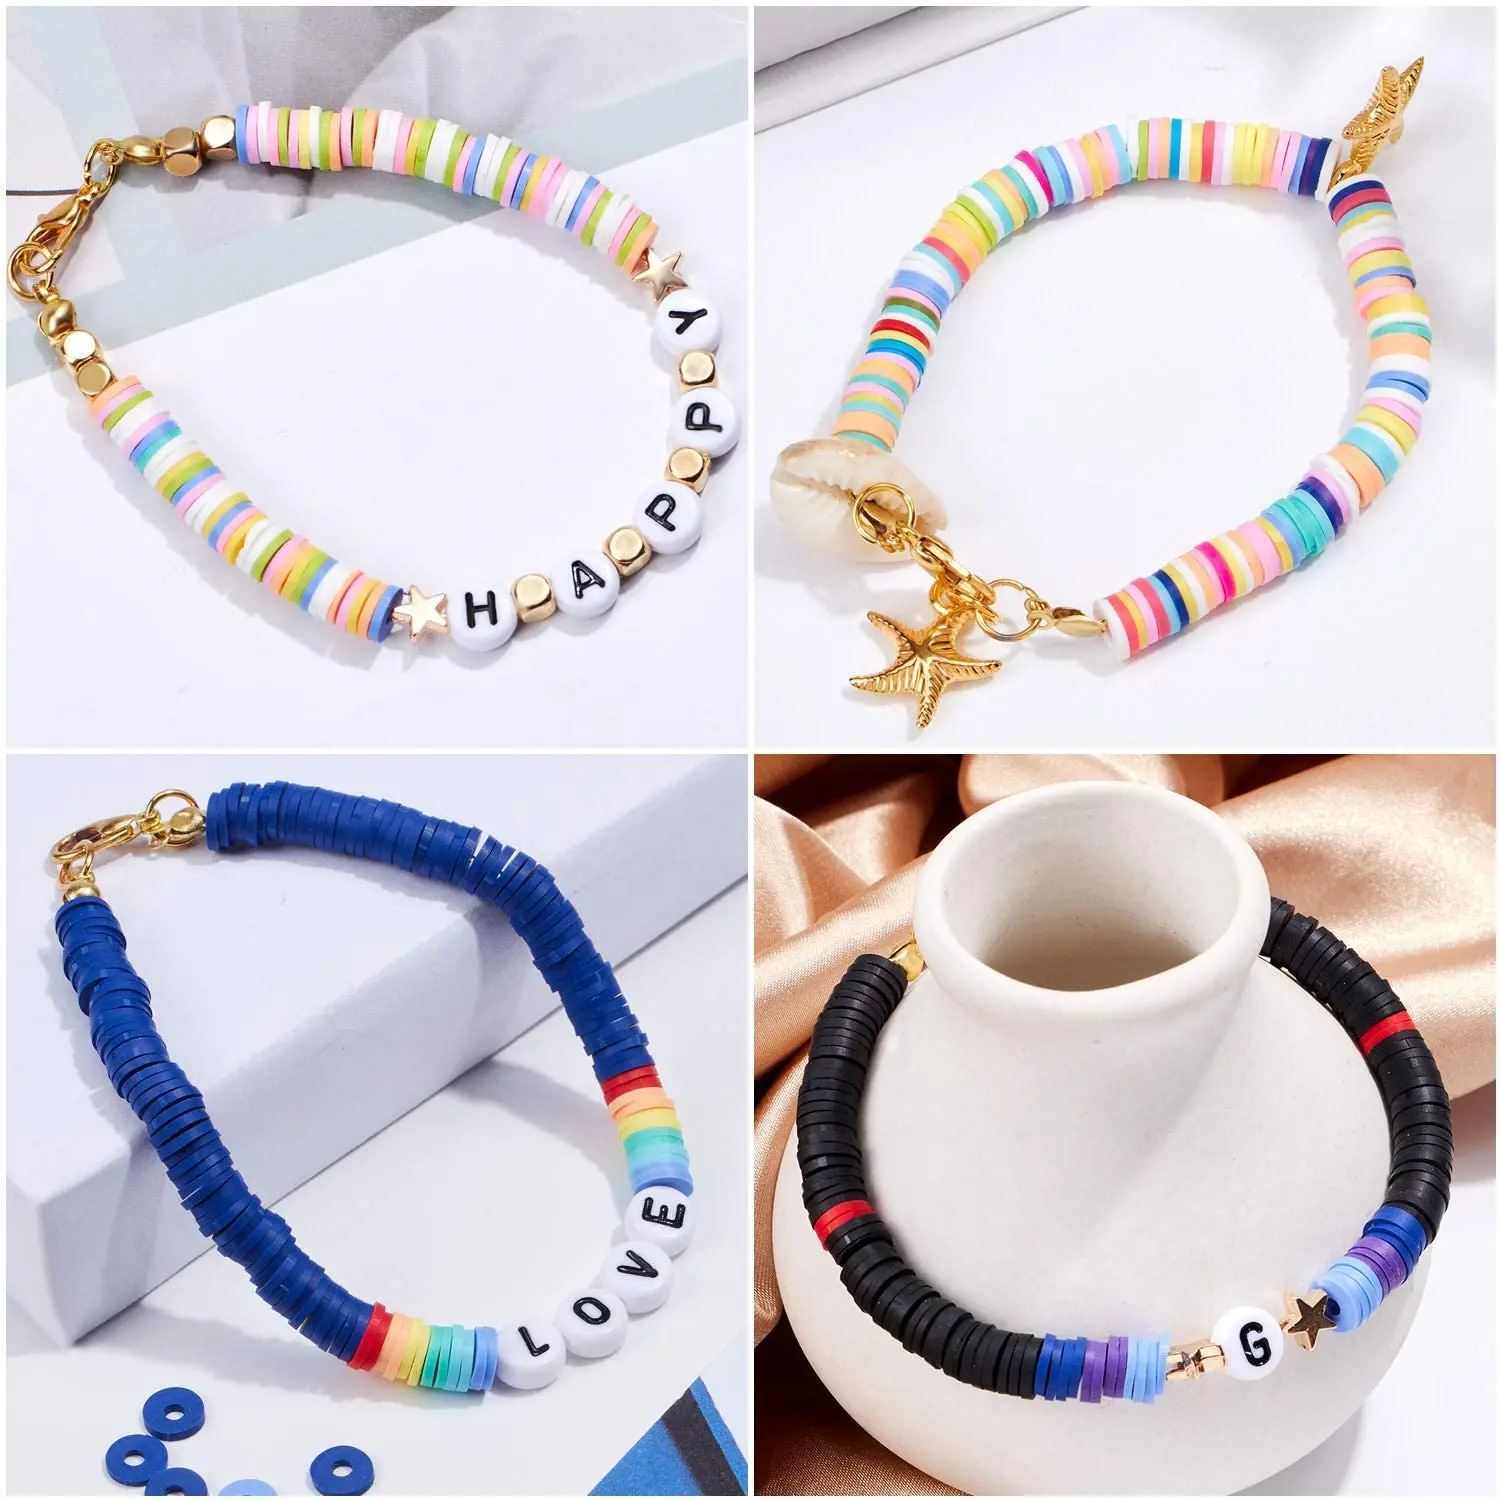 5580Pcs Polymer Clay Spacer Beads Flat Round Heishi Beads Handmade Colorful Beads Set for DIY Beads Earring Necklace Bracelet Craft Making with Pendant and Jump Rings for Kids Adults